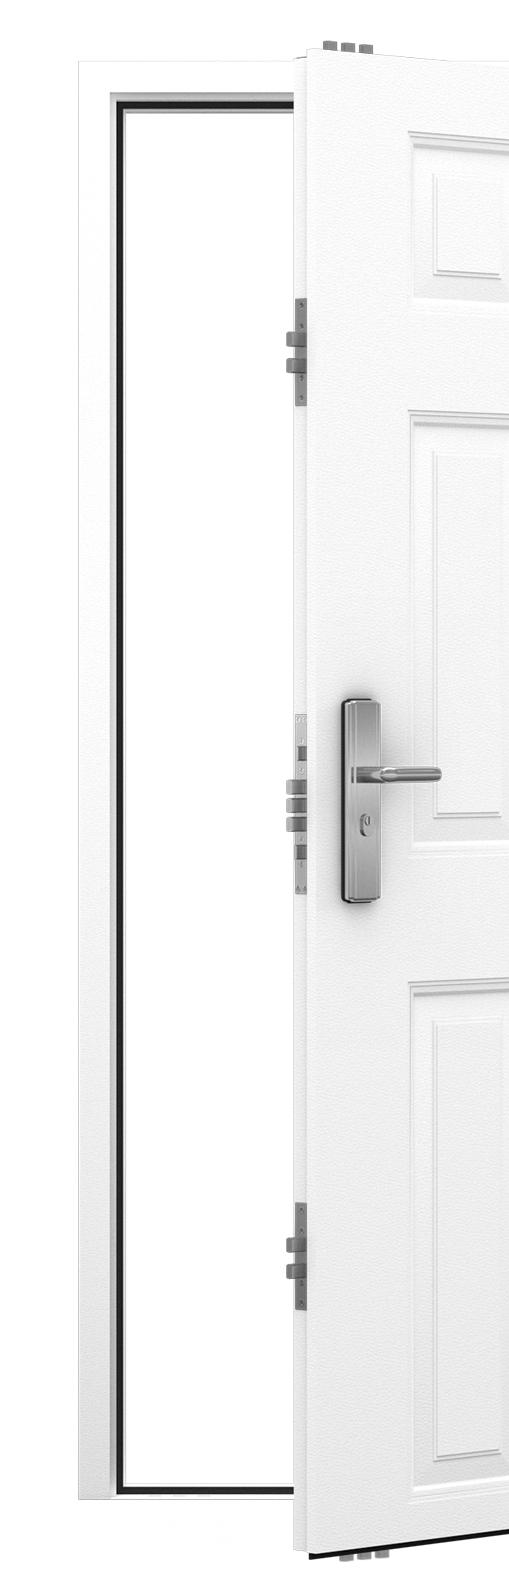 STEEL SECURITY DOORS Heavy Duty Panelled Door Compared to our Standard Duty Steel Door, this security door has far superior impact, acoustic and thermal values.